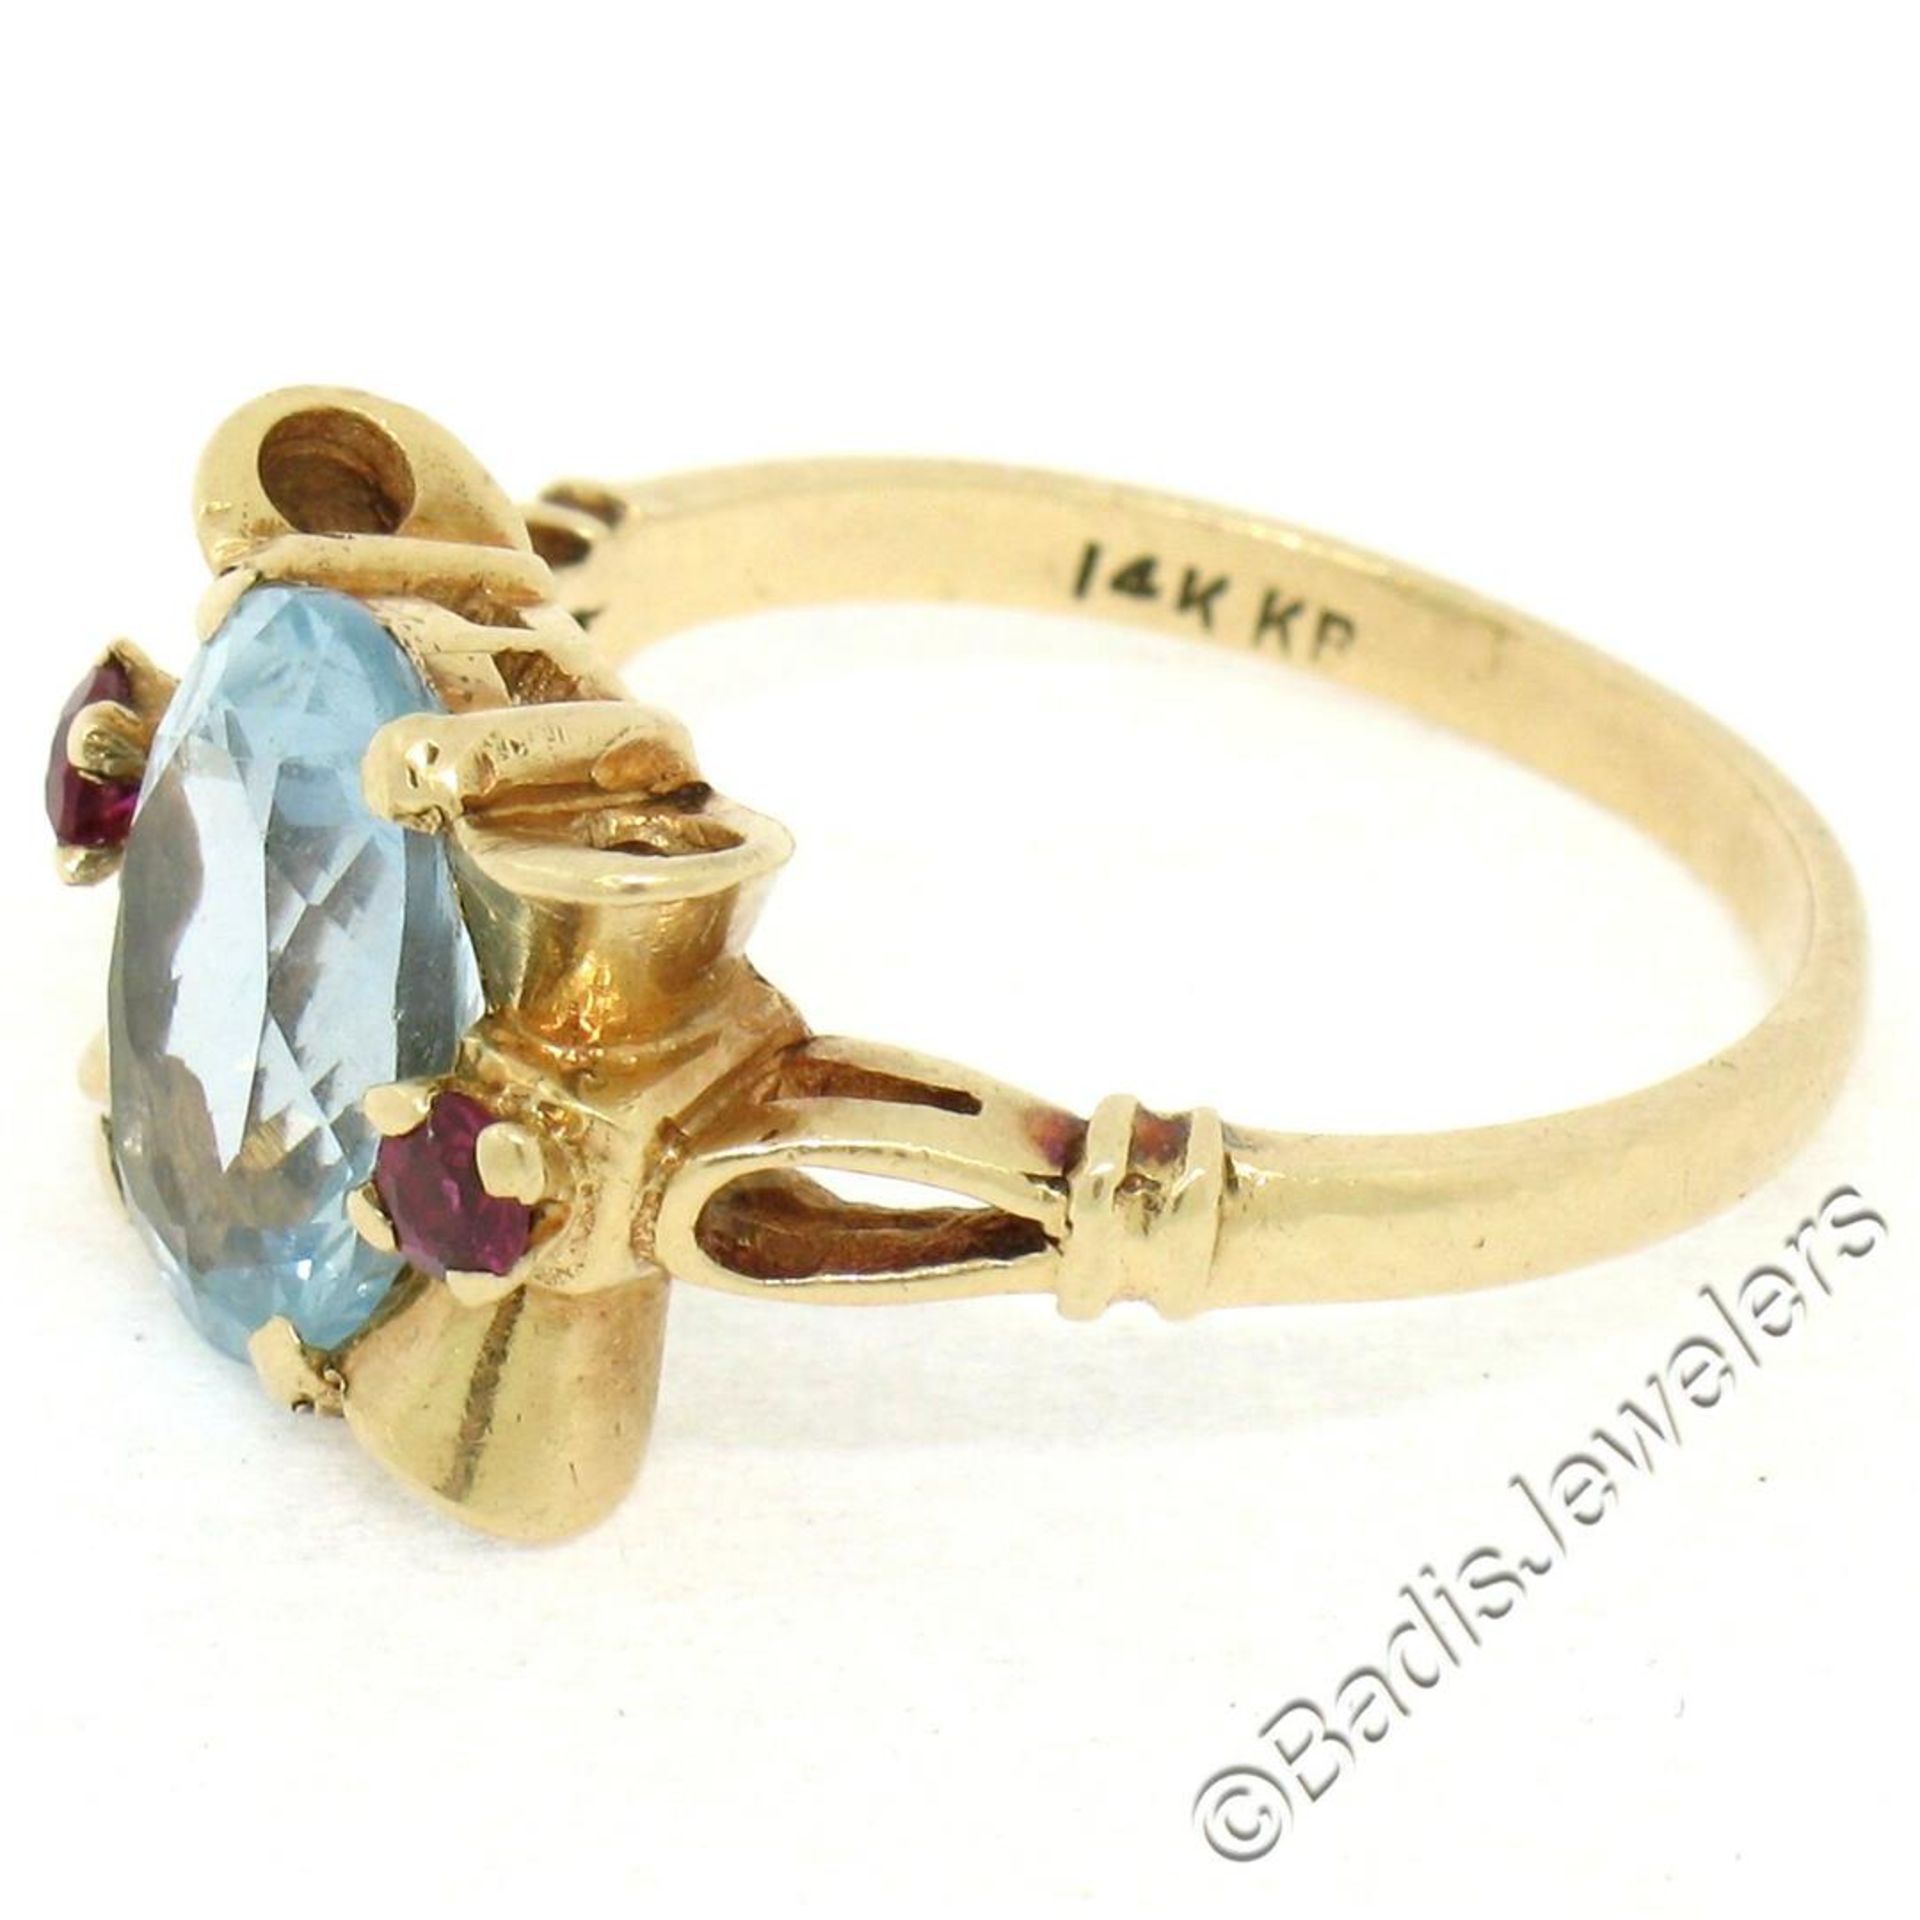 Retro 14kt Yellow Gold 2.18 ctw Aquamarine Solitaire and Synthetic Ruby Ring - Image 5 of 9